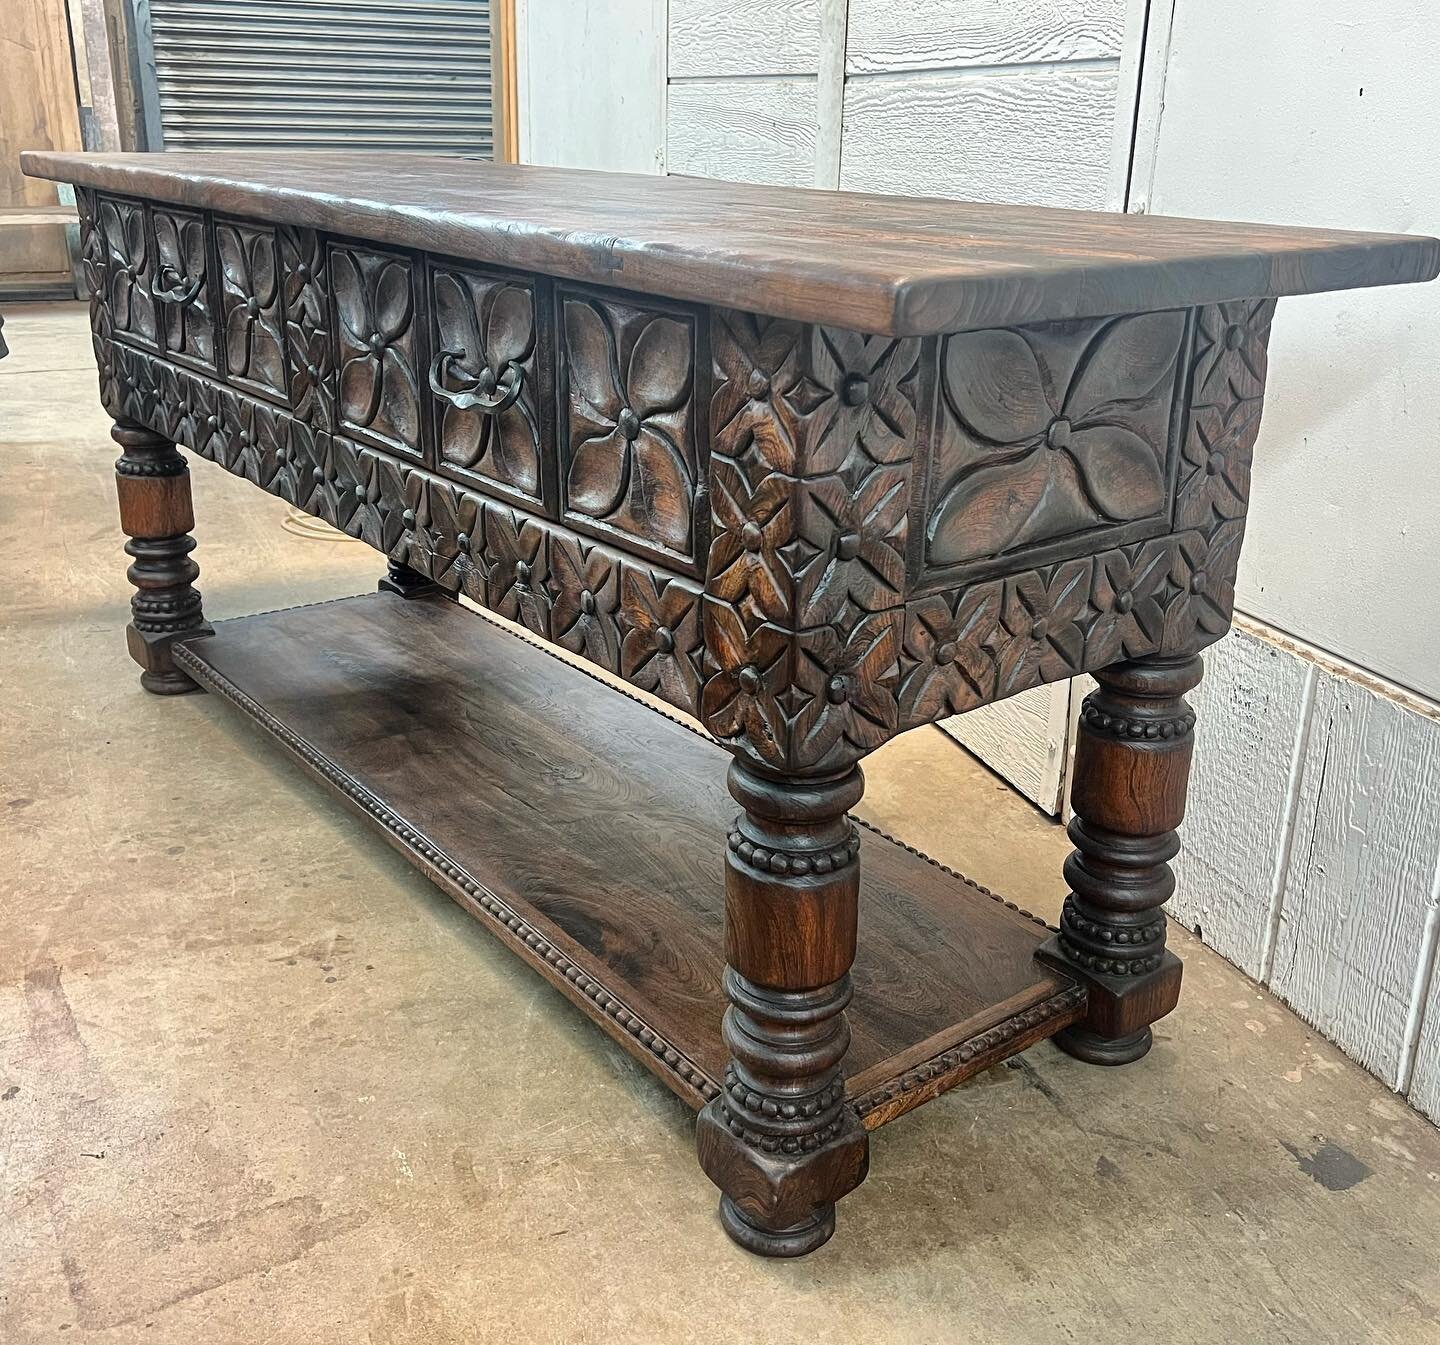 This beautifully hand carved console arrived at its new home today. #customfurniture #handcarved #table #furniture #interiordesign #beautifulhomes #craftsmanship